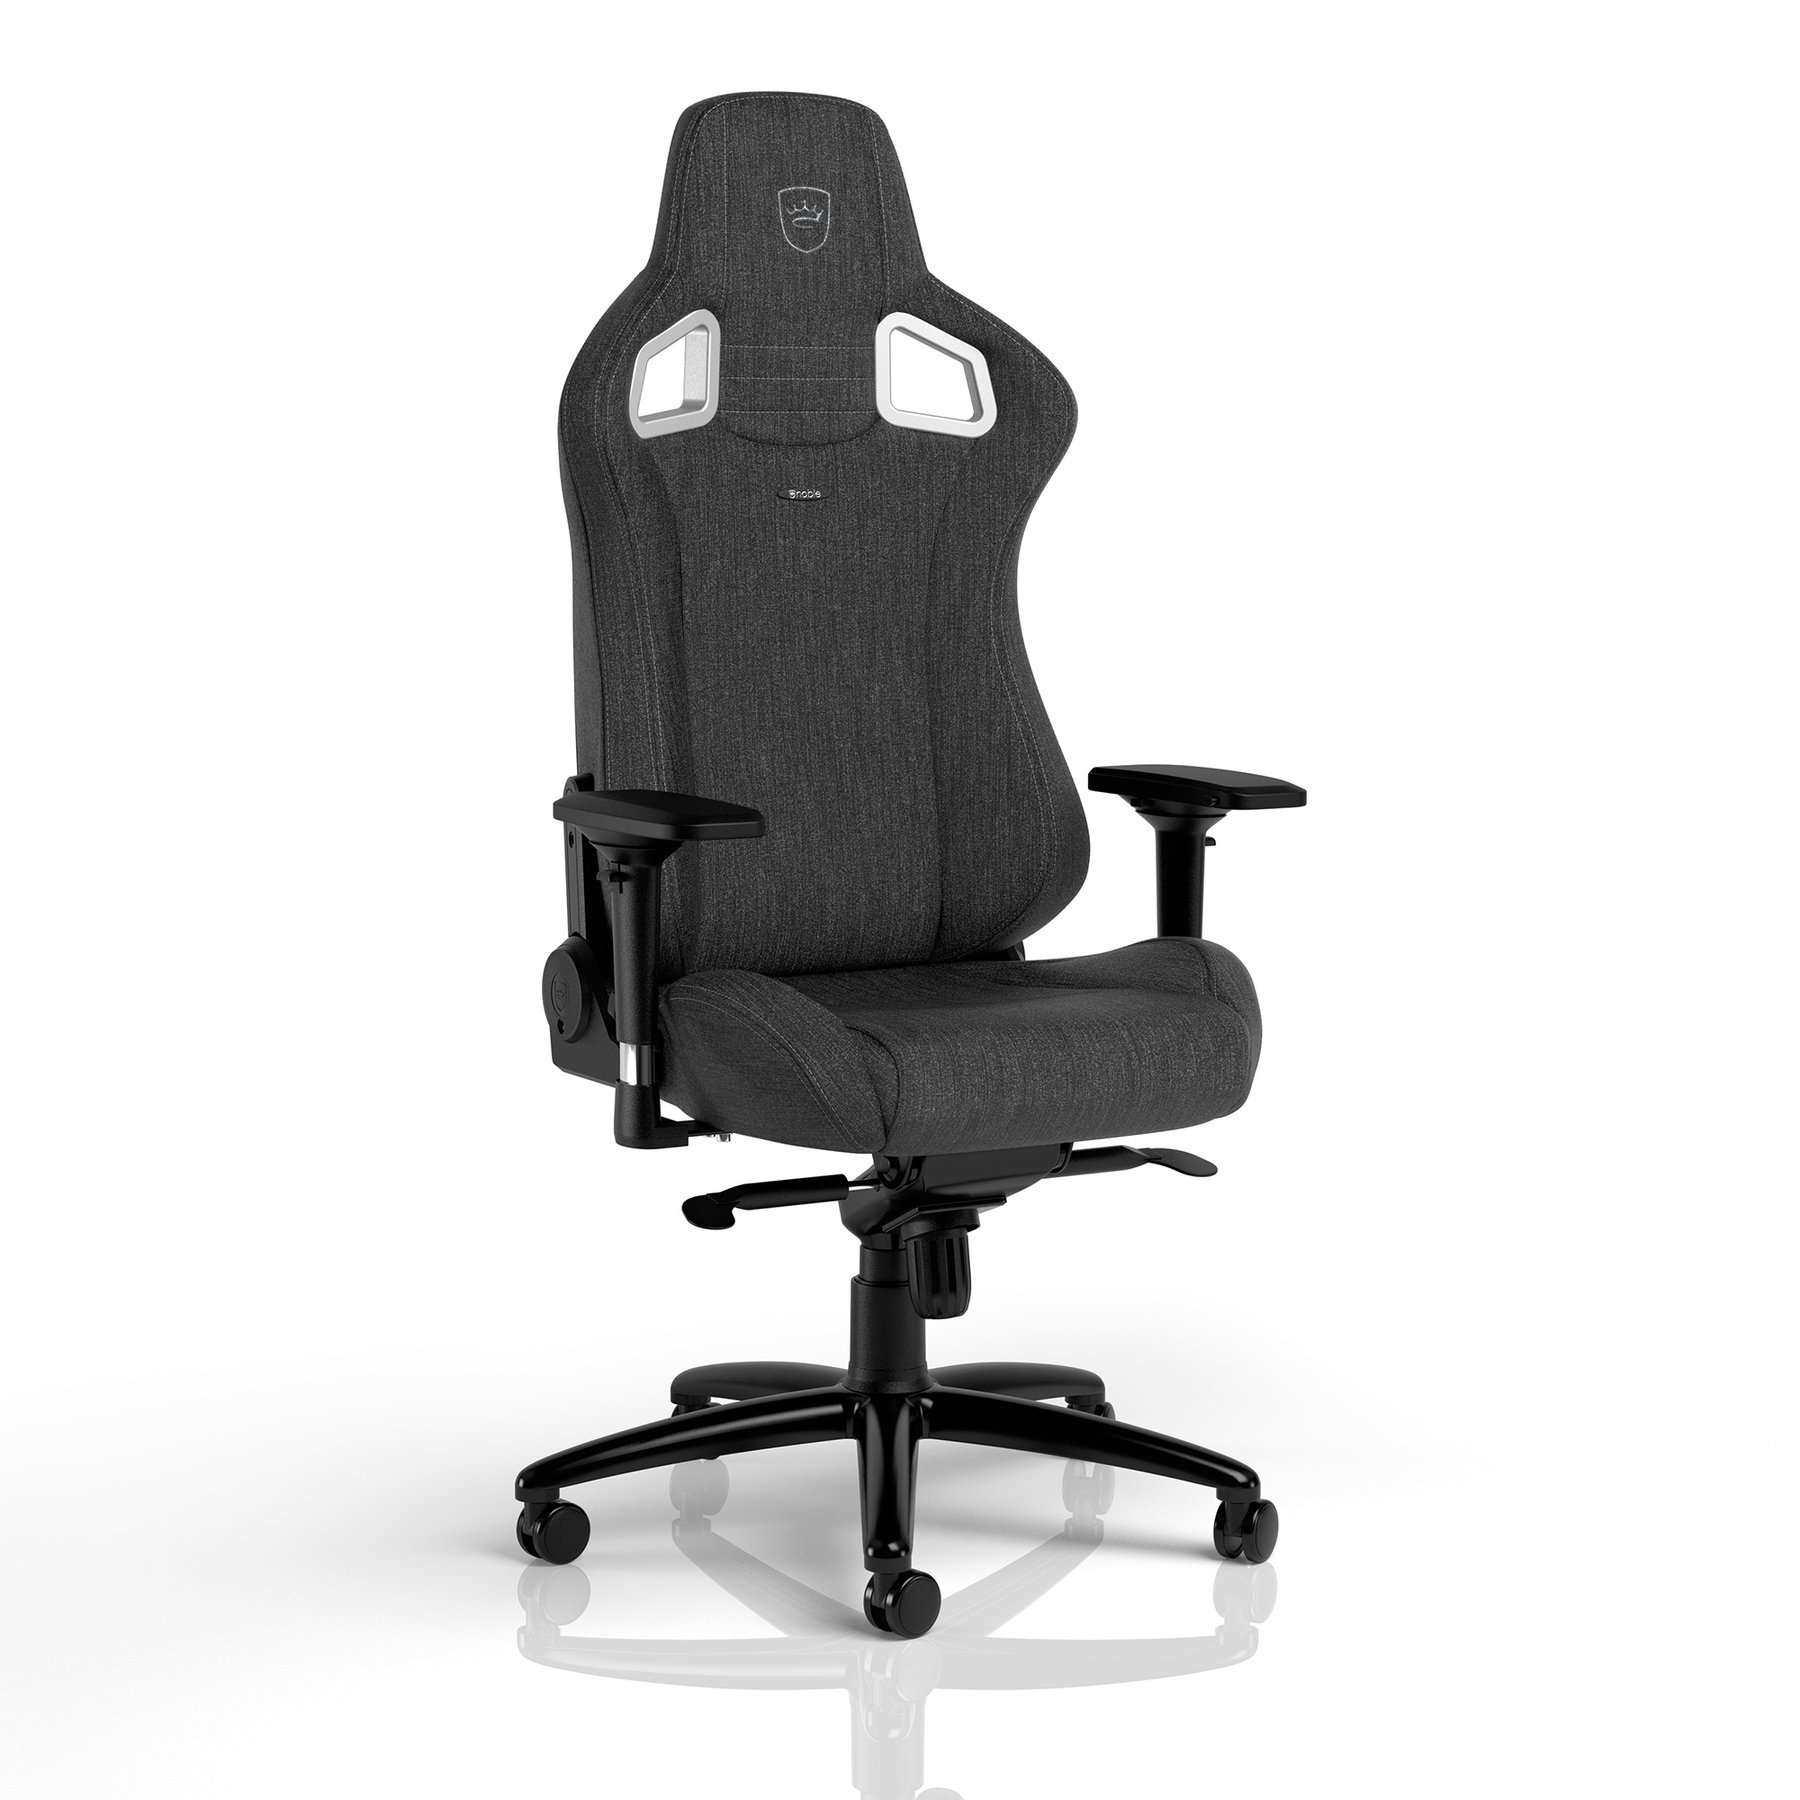 noblechairs - Cadeira noblechairs EPIC TX -  Fabric Edition Anthracite